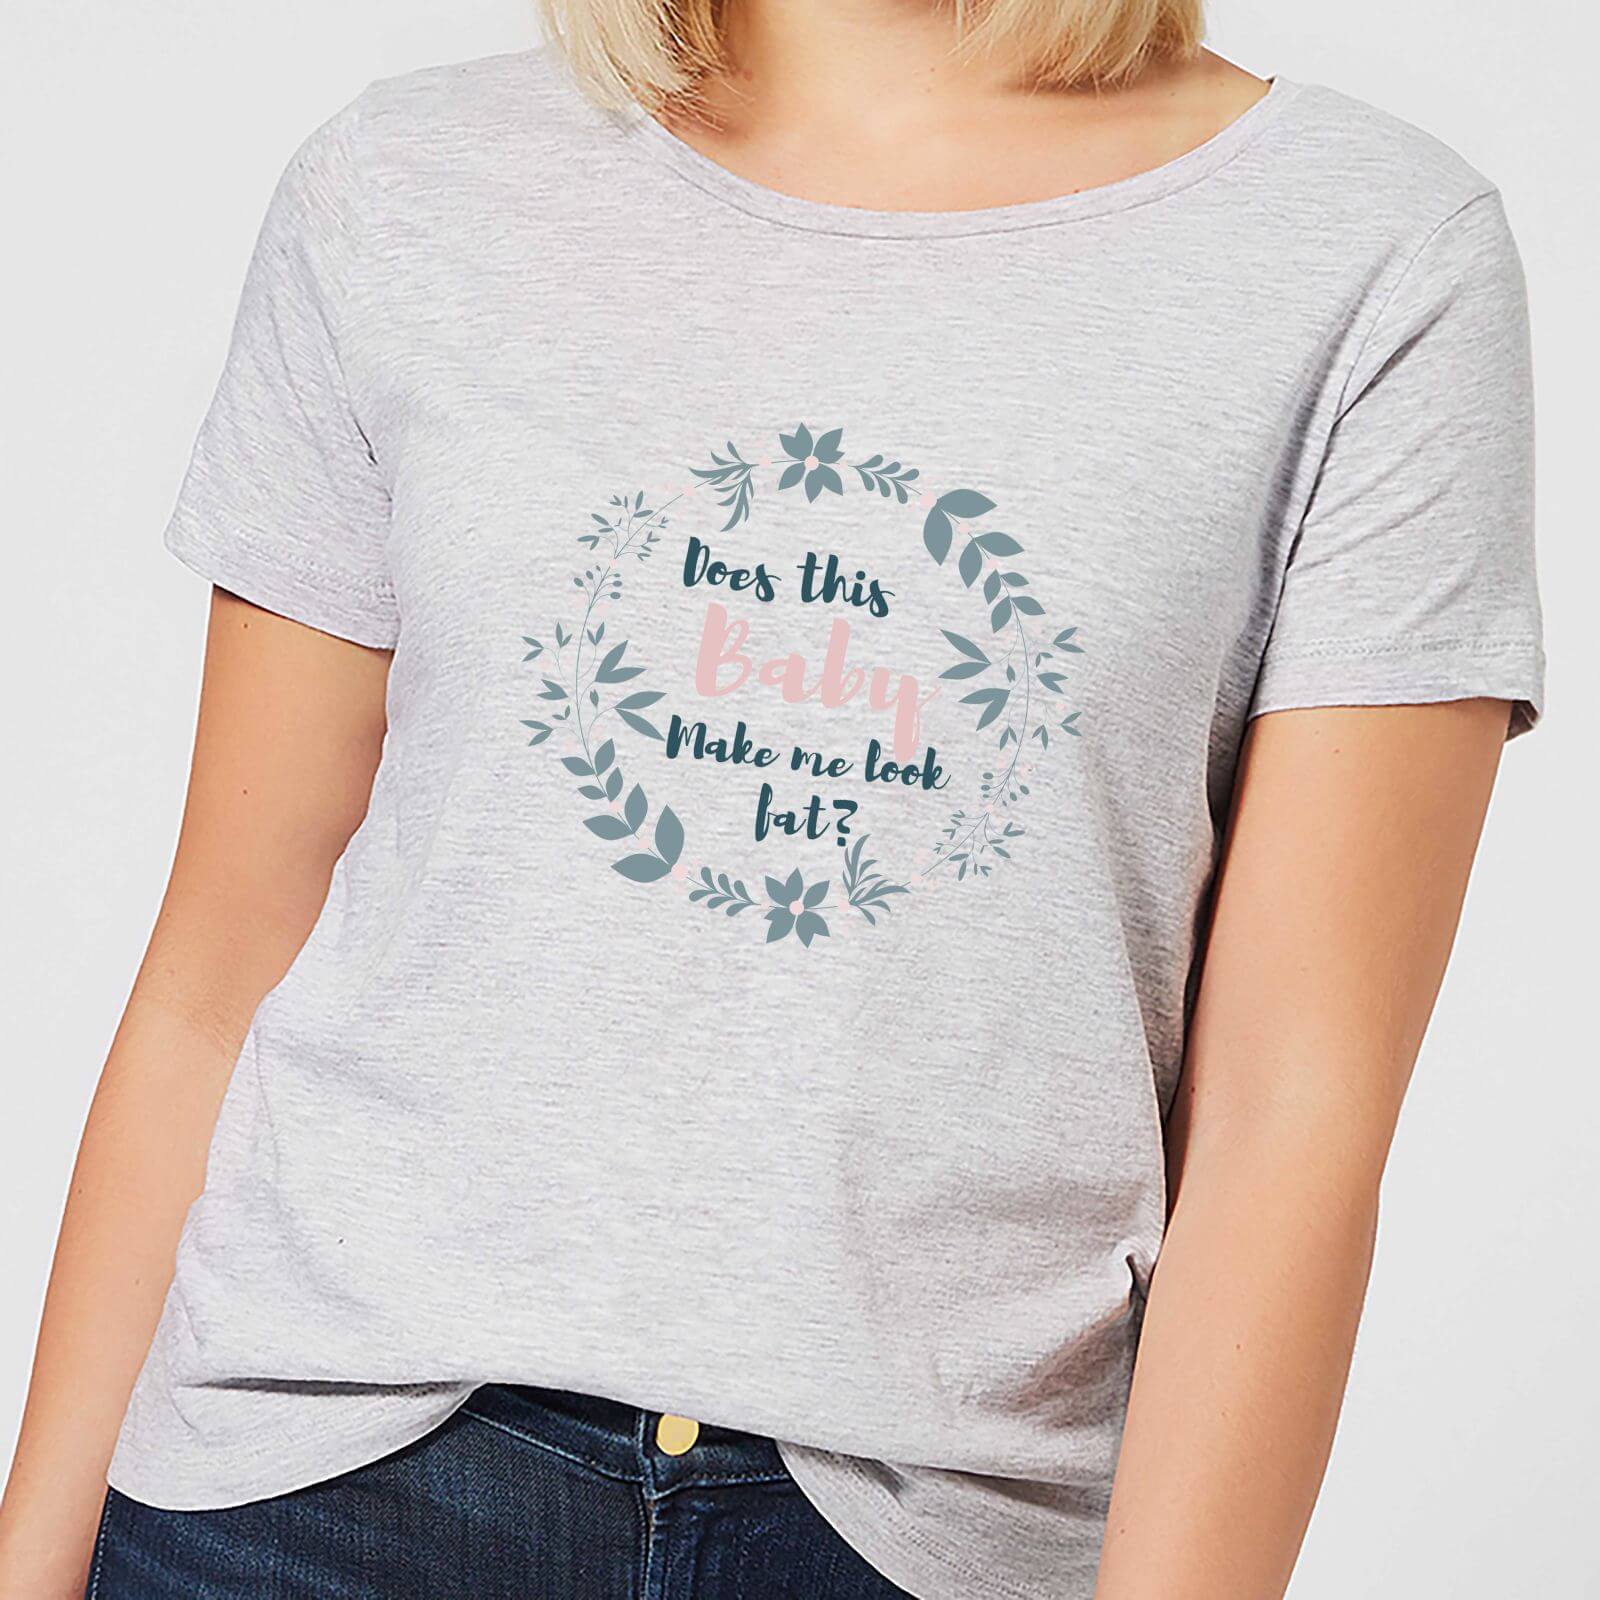 Be My Pretty Does This Baby Women's T-Shirt - Grey - 3XL - Grey